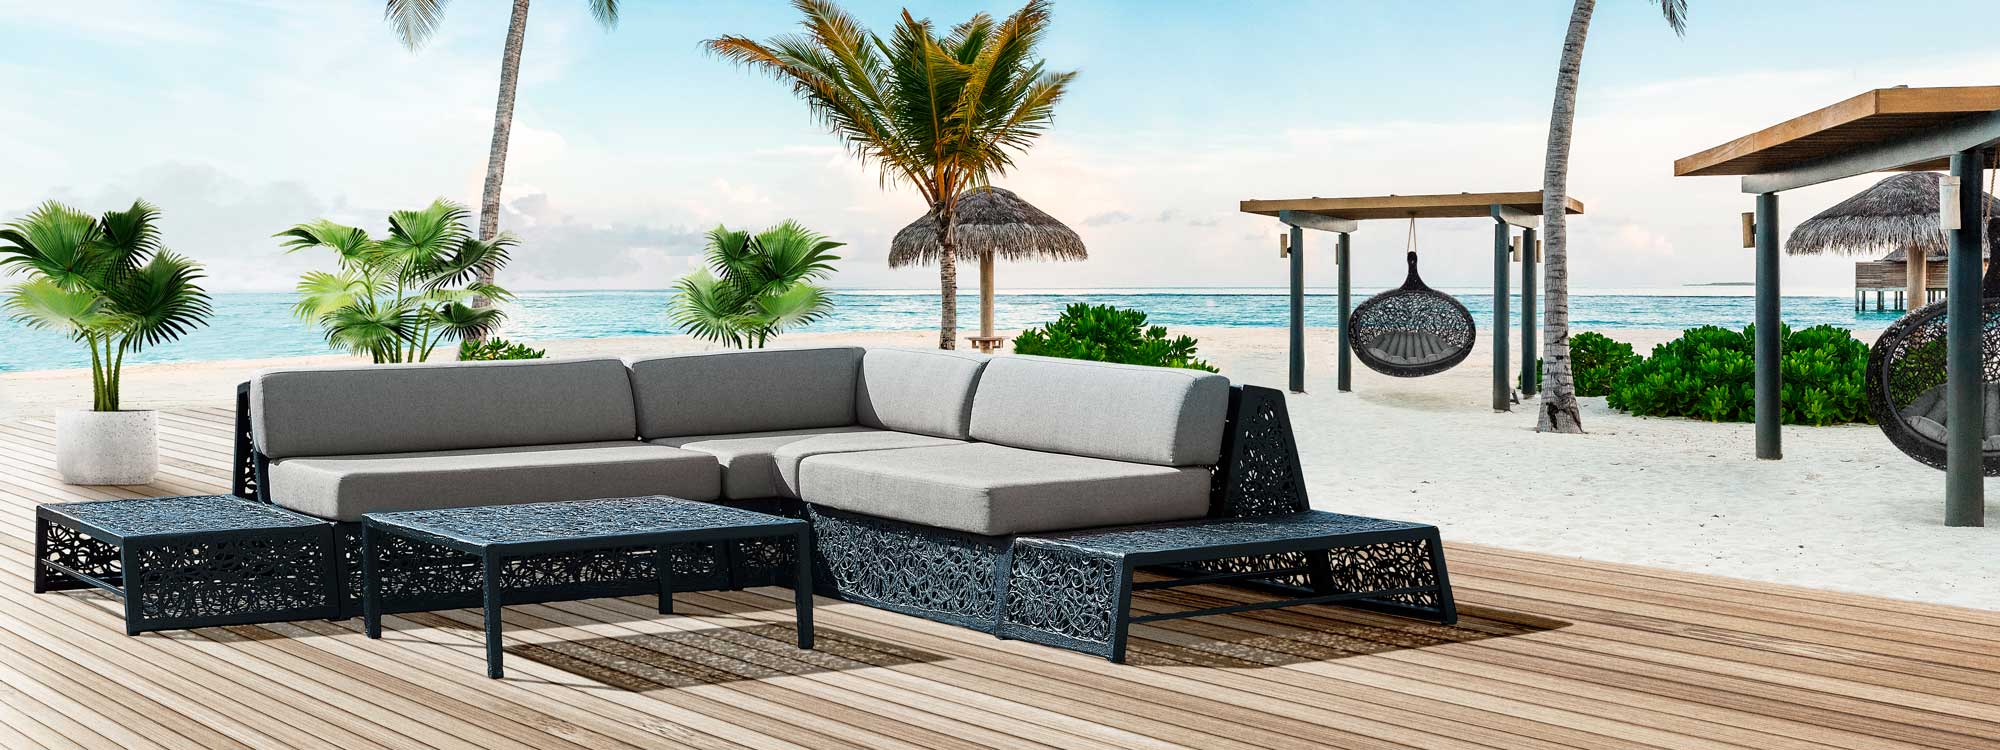 Image of Bios Lounge black sofa with cappuccino cushions on decking, with palm trees, sea and Bios Hide swing seats by Unknown Nordic in the background